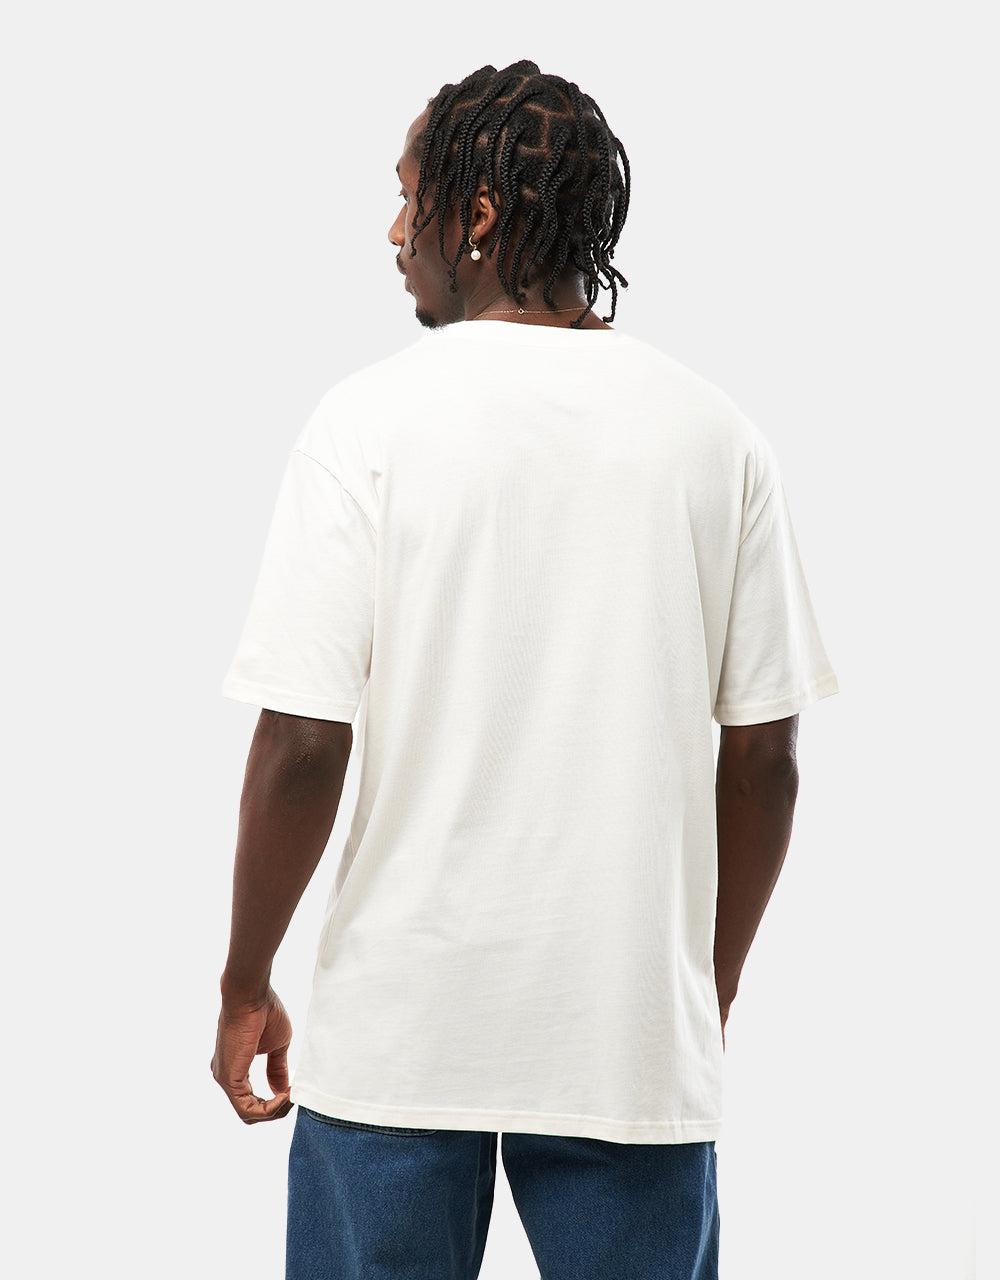 Route One Organic T-Shirt - Raw